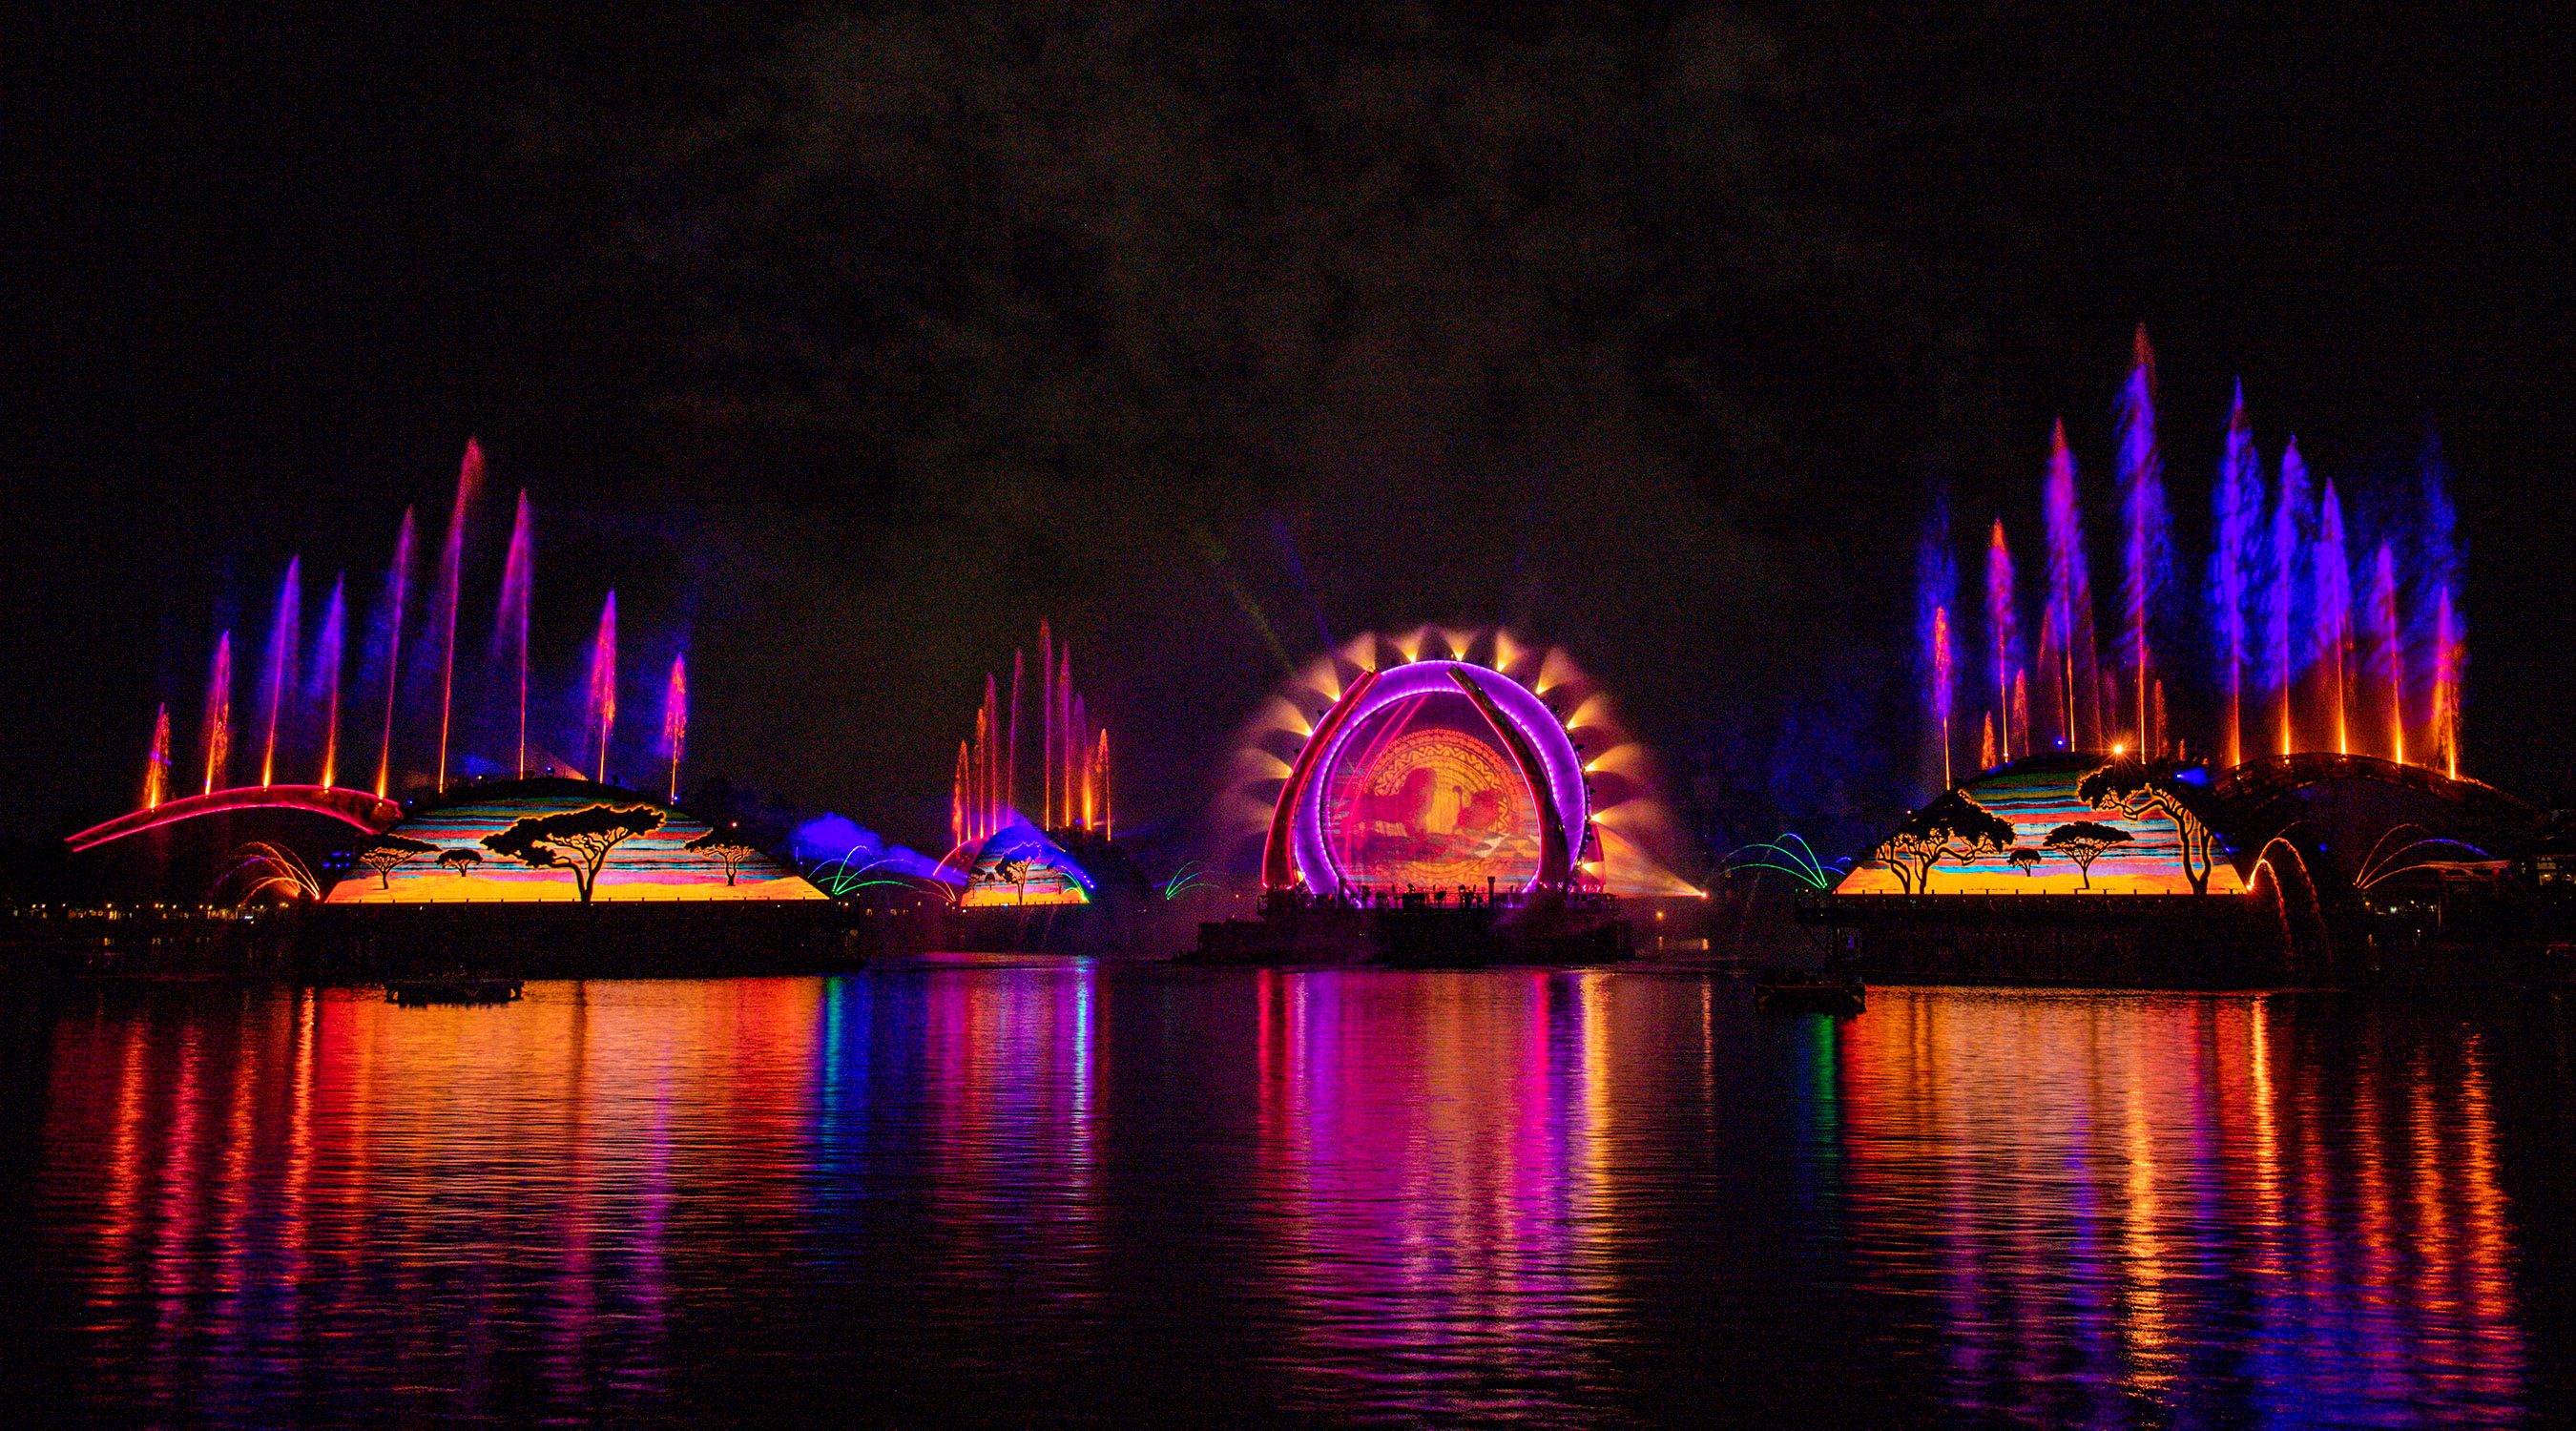 EPCOT's Harmonious to be replaced with new nighttime spectacular in 2023